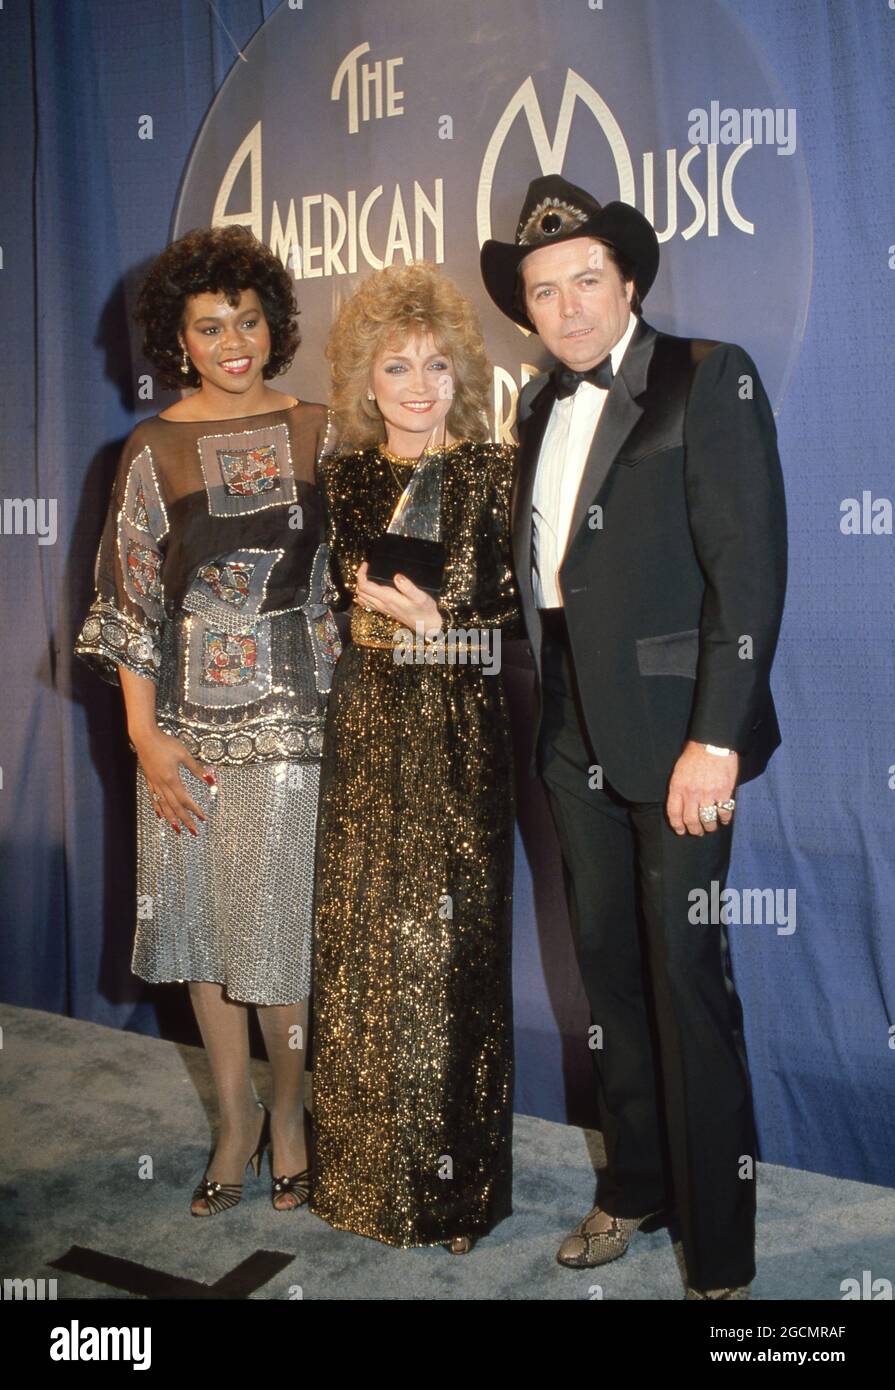 Deniece Williams, Barbara Mandrell and Mickey Gilley at the 10th Annual American Music Awards at Shrine Auditorium in Los Angeles, California January 17, 1983 Credit: Ralph Dominguez/MediaPunch Stock Photo